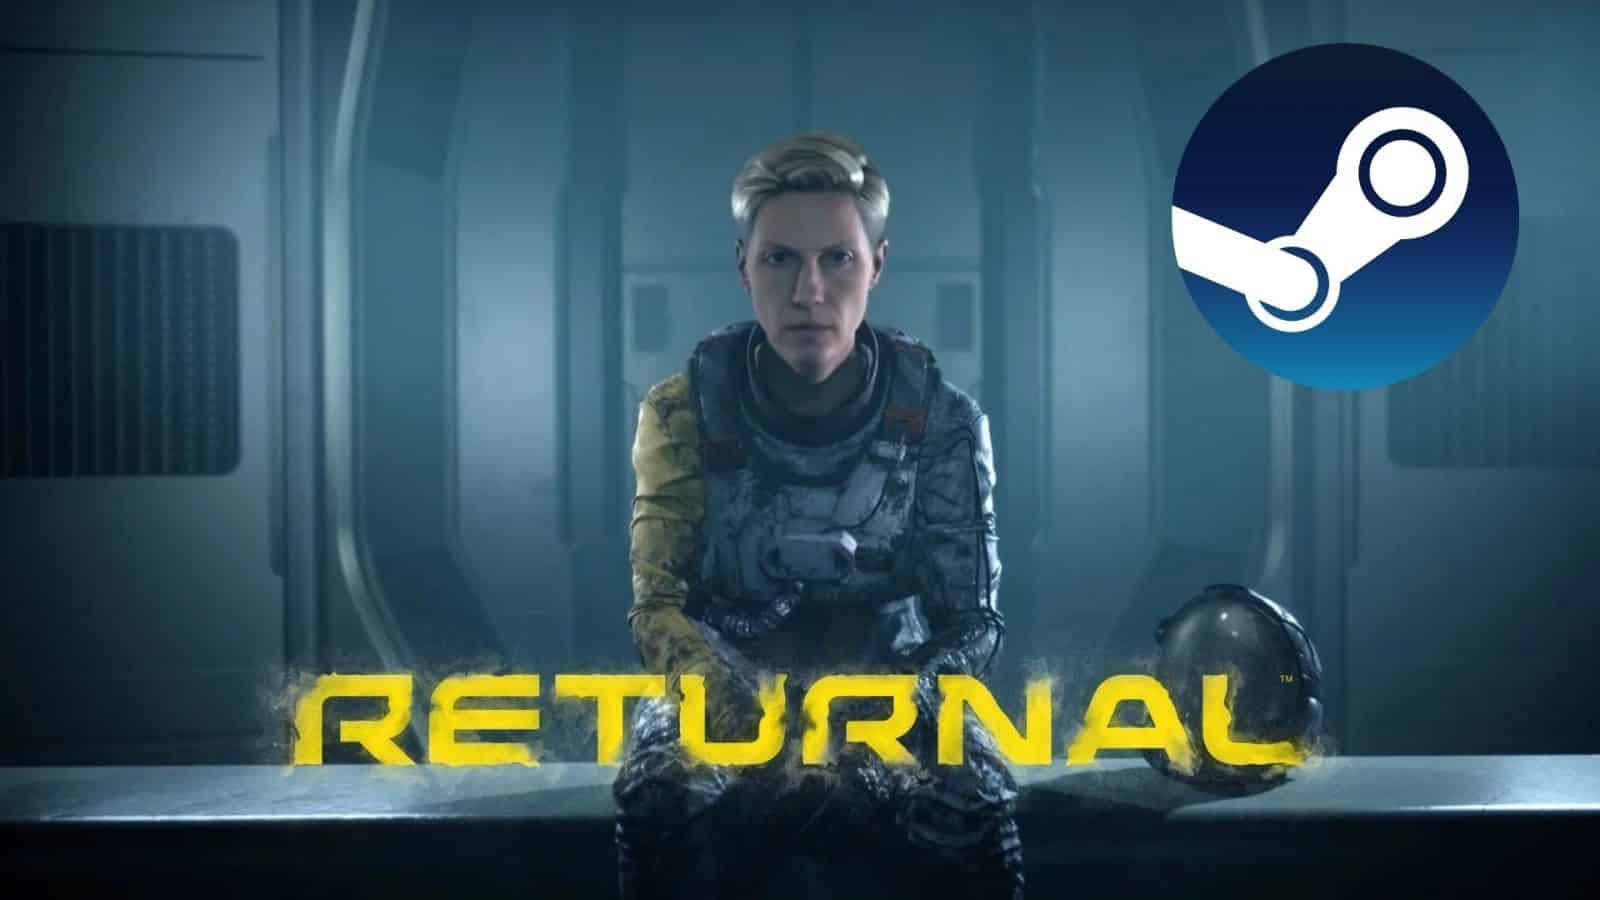 PS5 exclusive Returnal could be coming to Steam according to new leak -  Dexerto